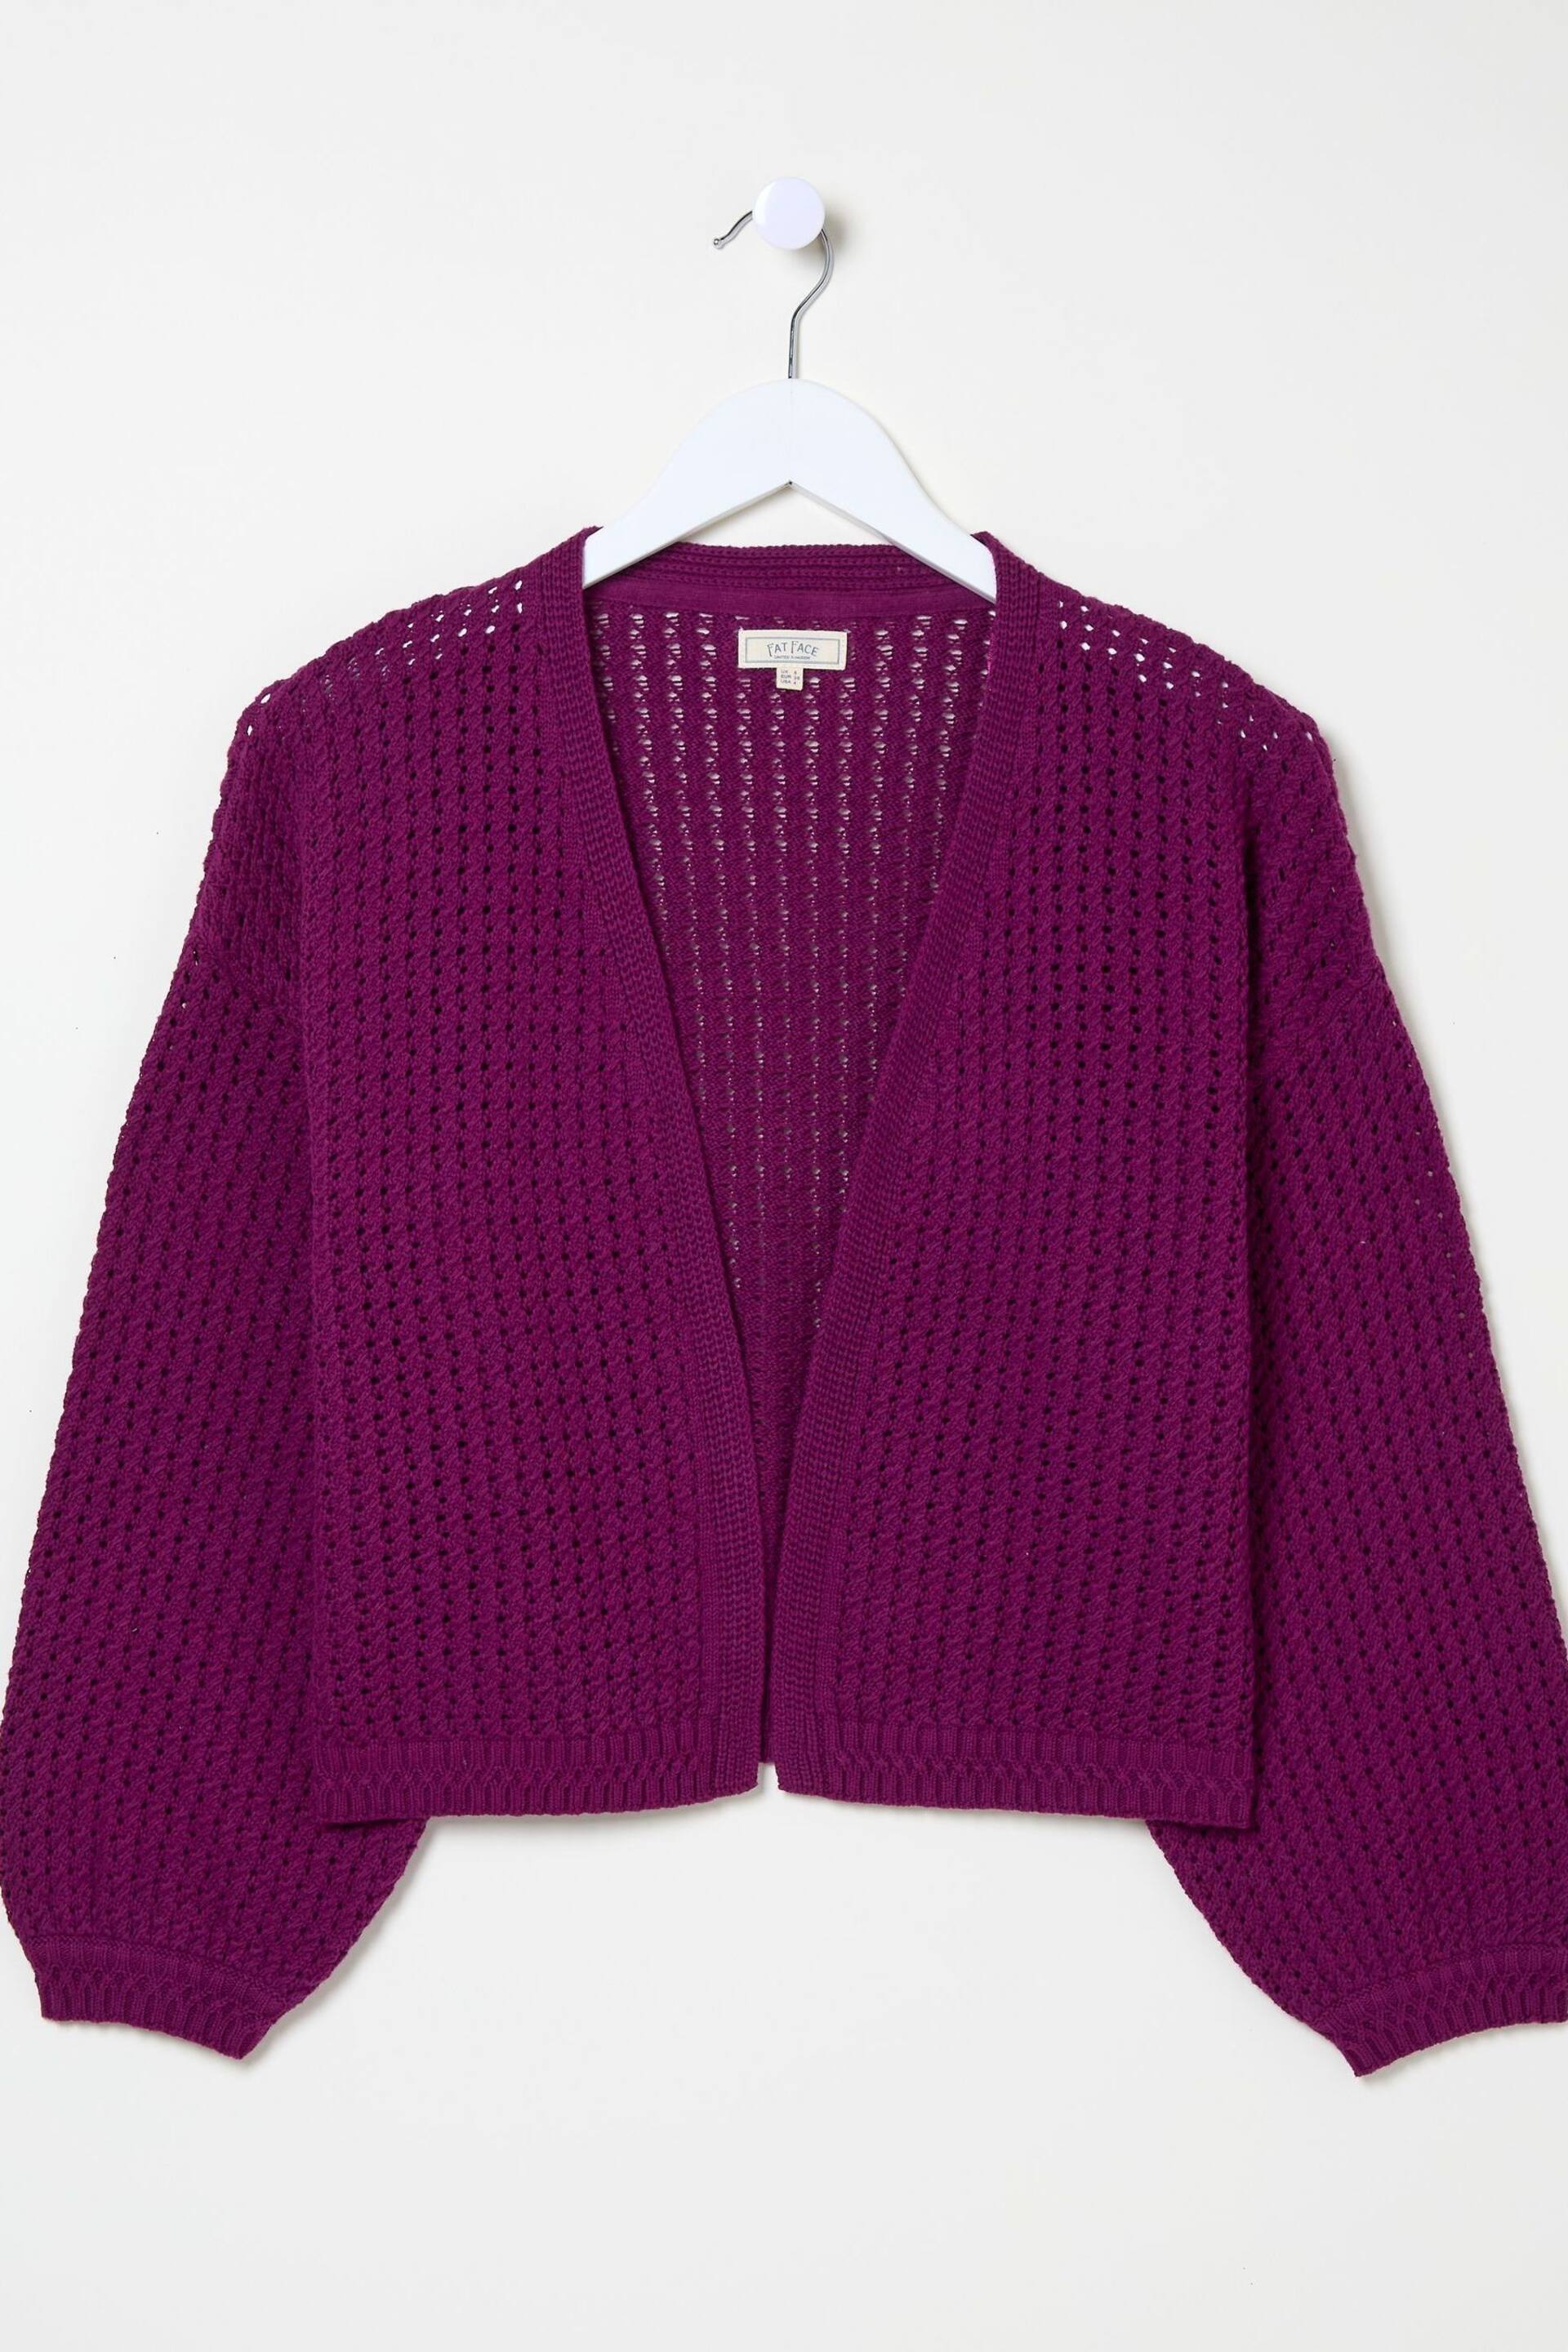 FatFace Red Anna Open Stitch Cardigan - Image 5 of 5